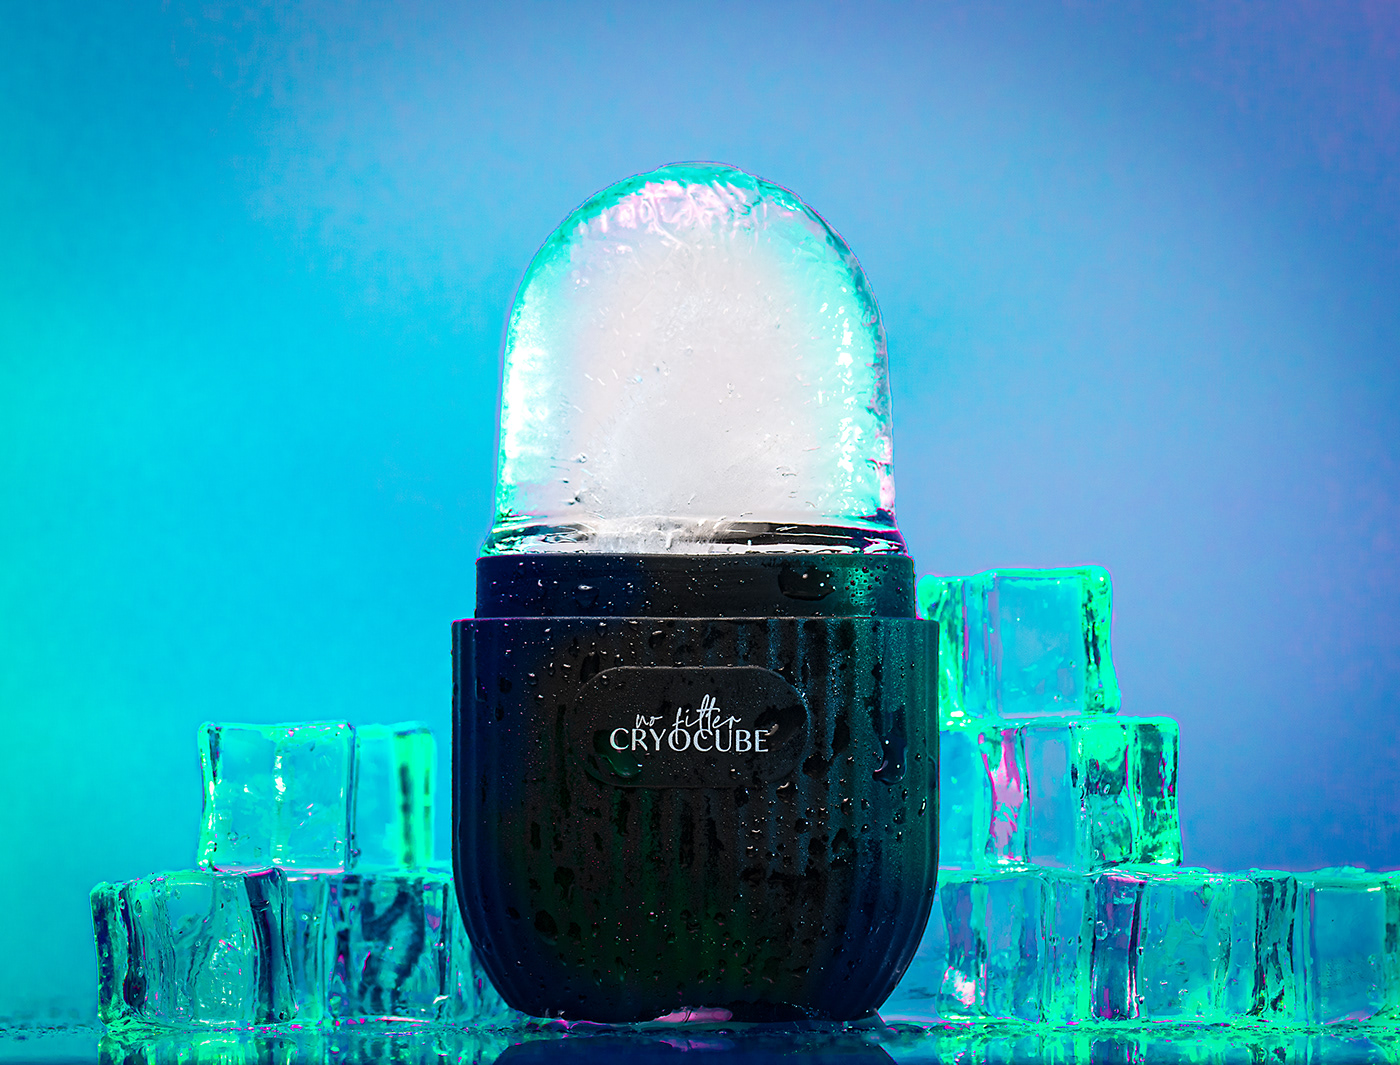 Product Photography boise Idaho facial frozen cold water cryocube ice wet